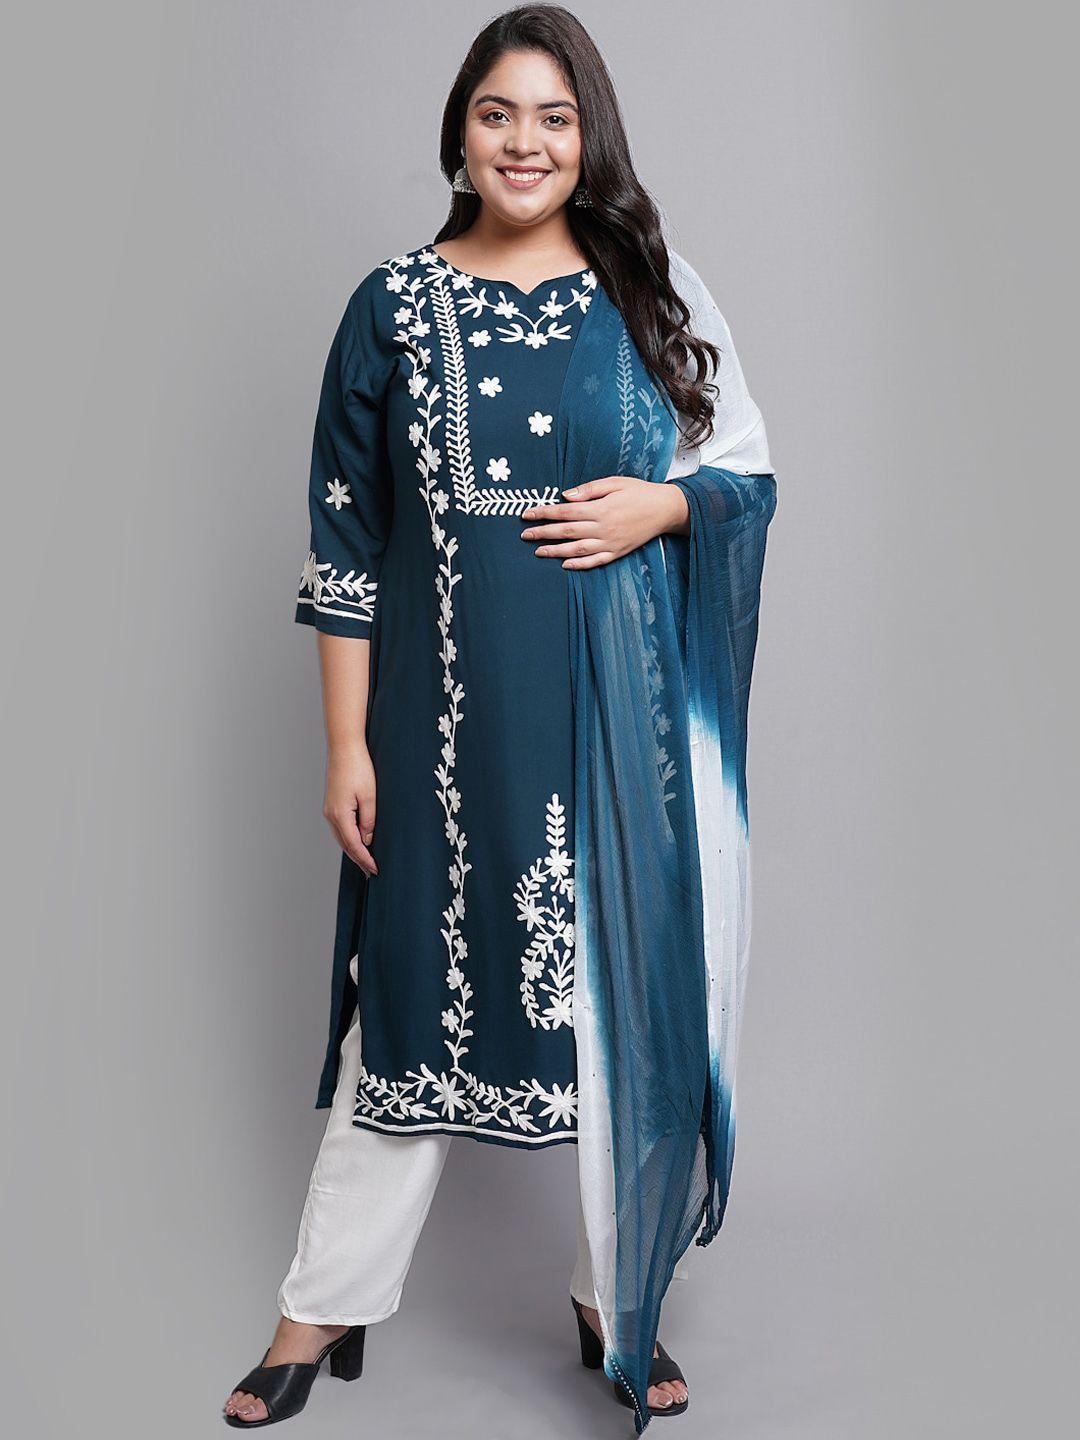 prettyplus by desinoor.com women teal floral embroidered regular kurta with trousers & with dupatta